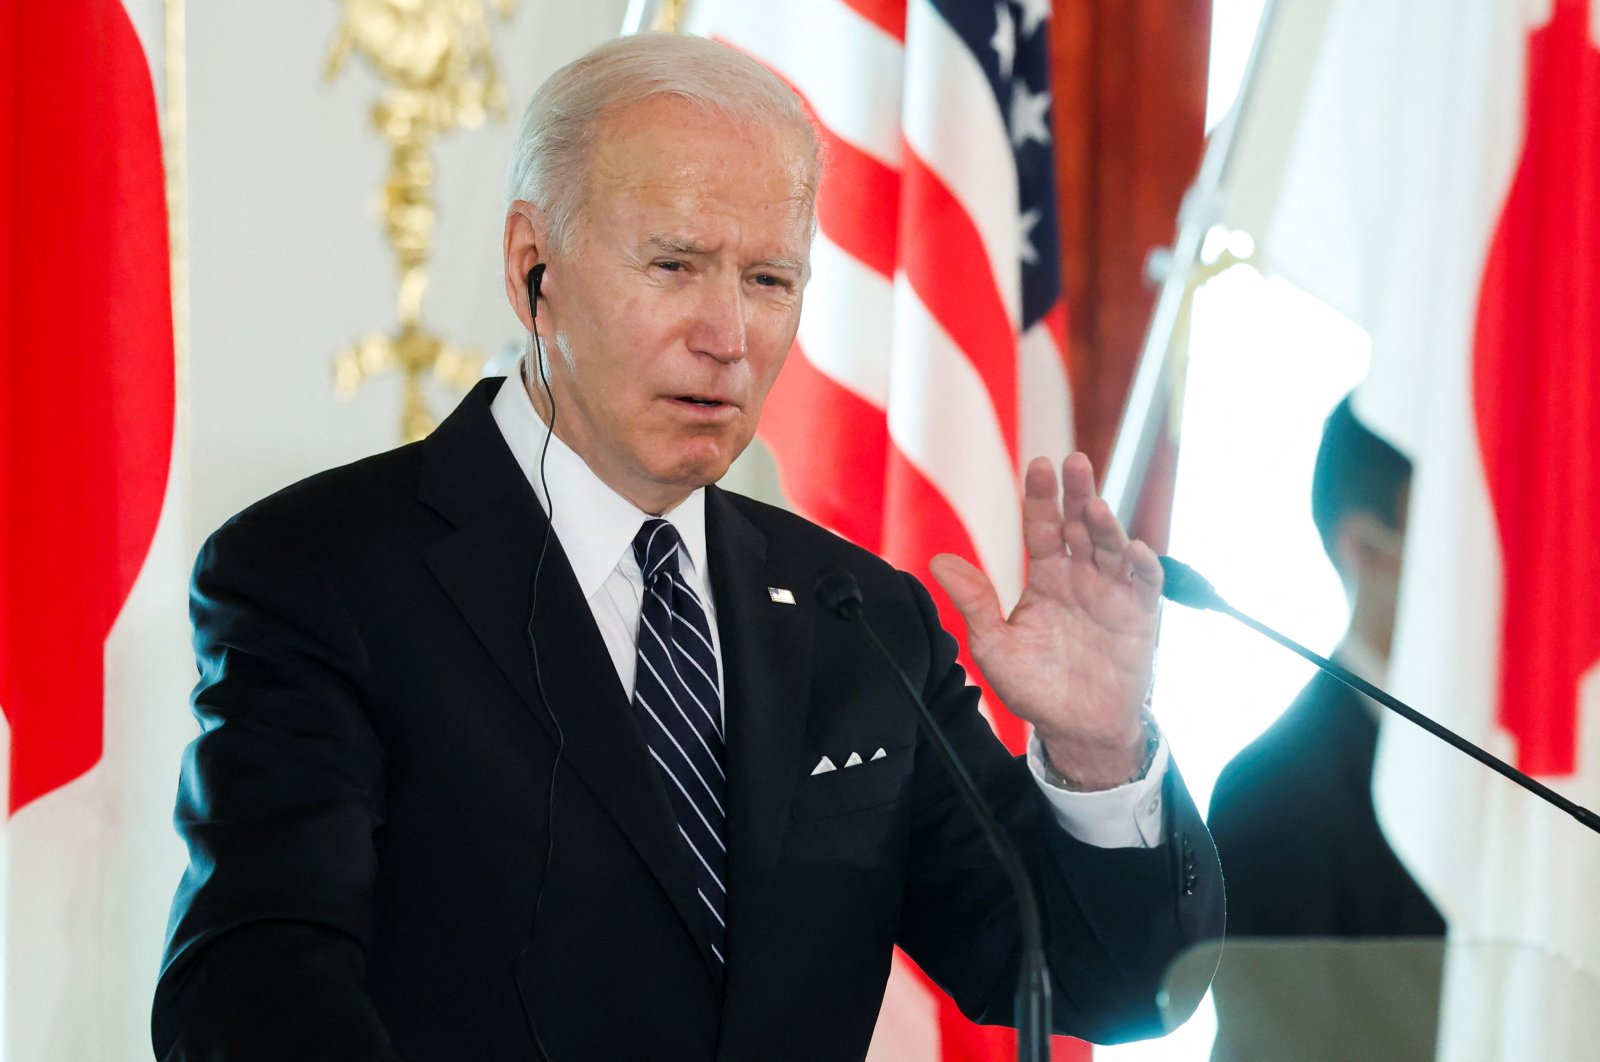 U.S. President Joe Biden speaks during a joint news conference with Japan&#039;s Prime Minister Fumio Kishida (not pictured) after their bilateral meeting at Akasaka Palace in Tokyo, Japan, May 23, 2022. (Reuters Photo)